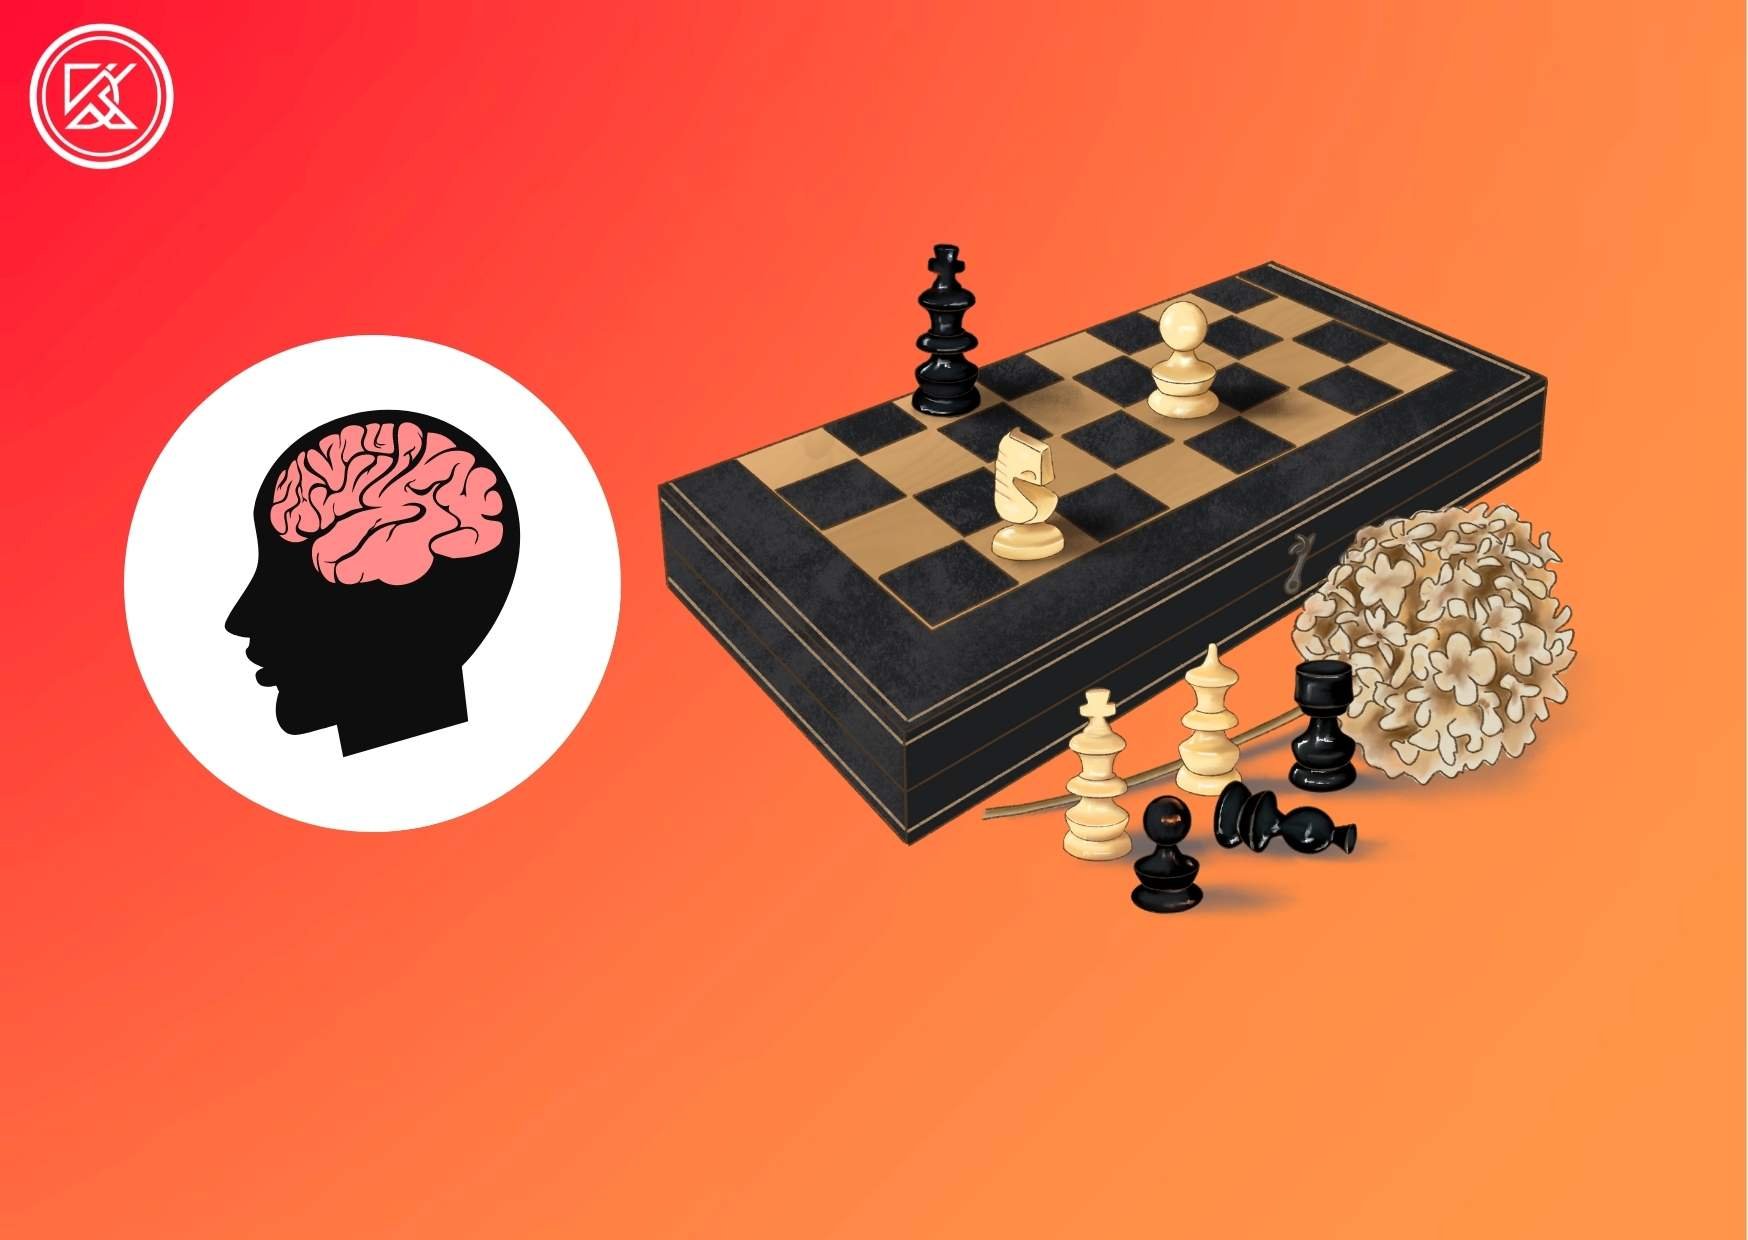 CLEARANCE - Test your Chess IQ